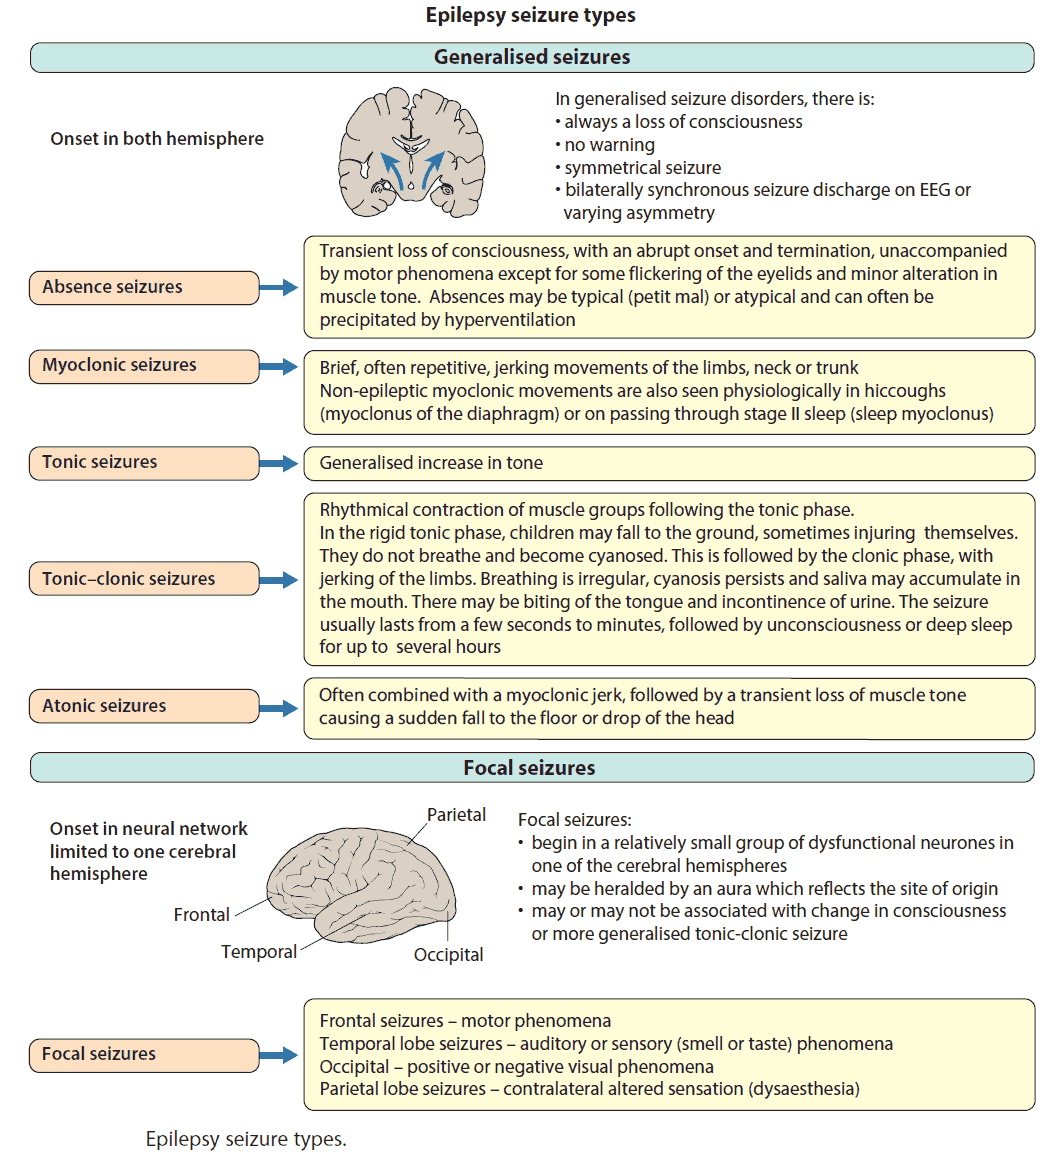 Epilepsy seizure types, classification and symptoms